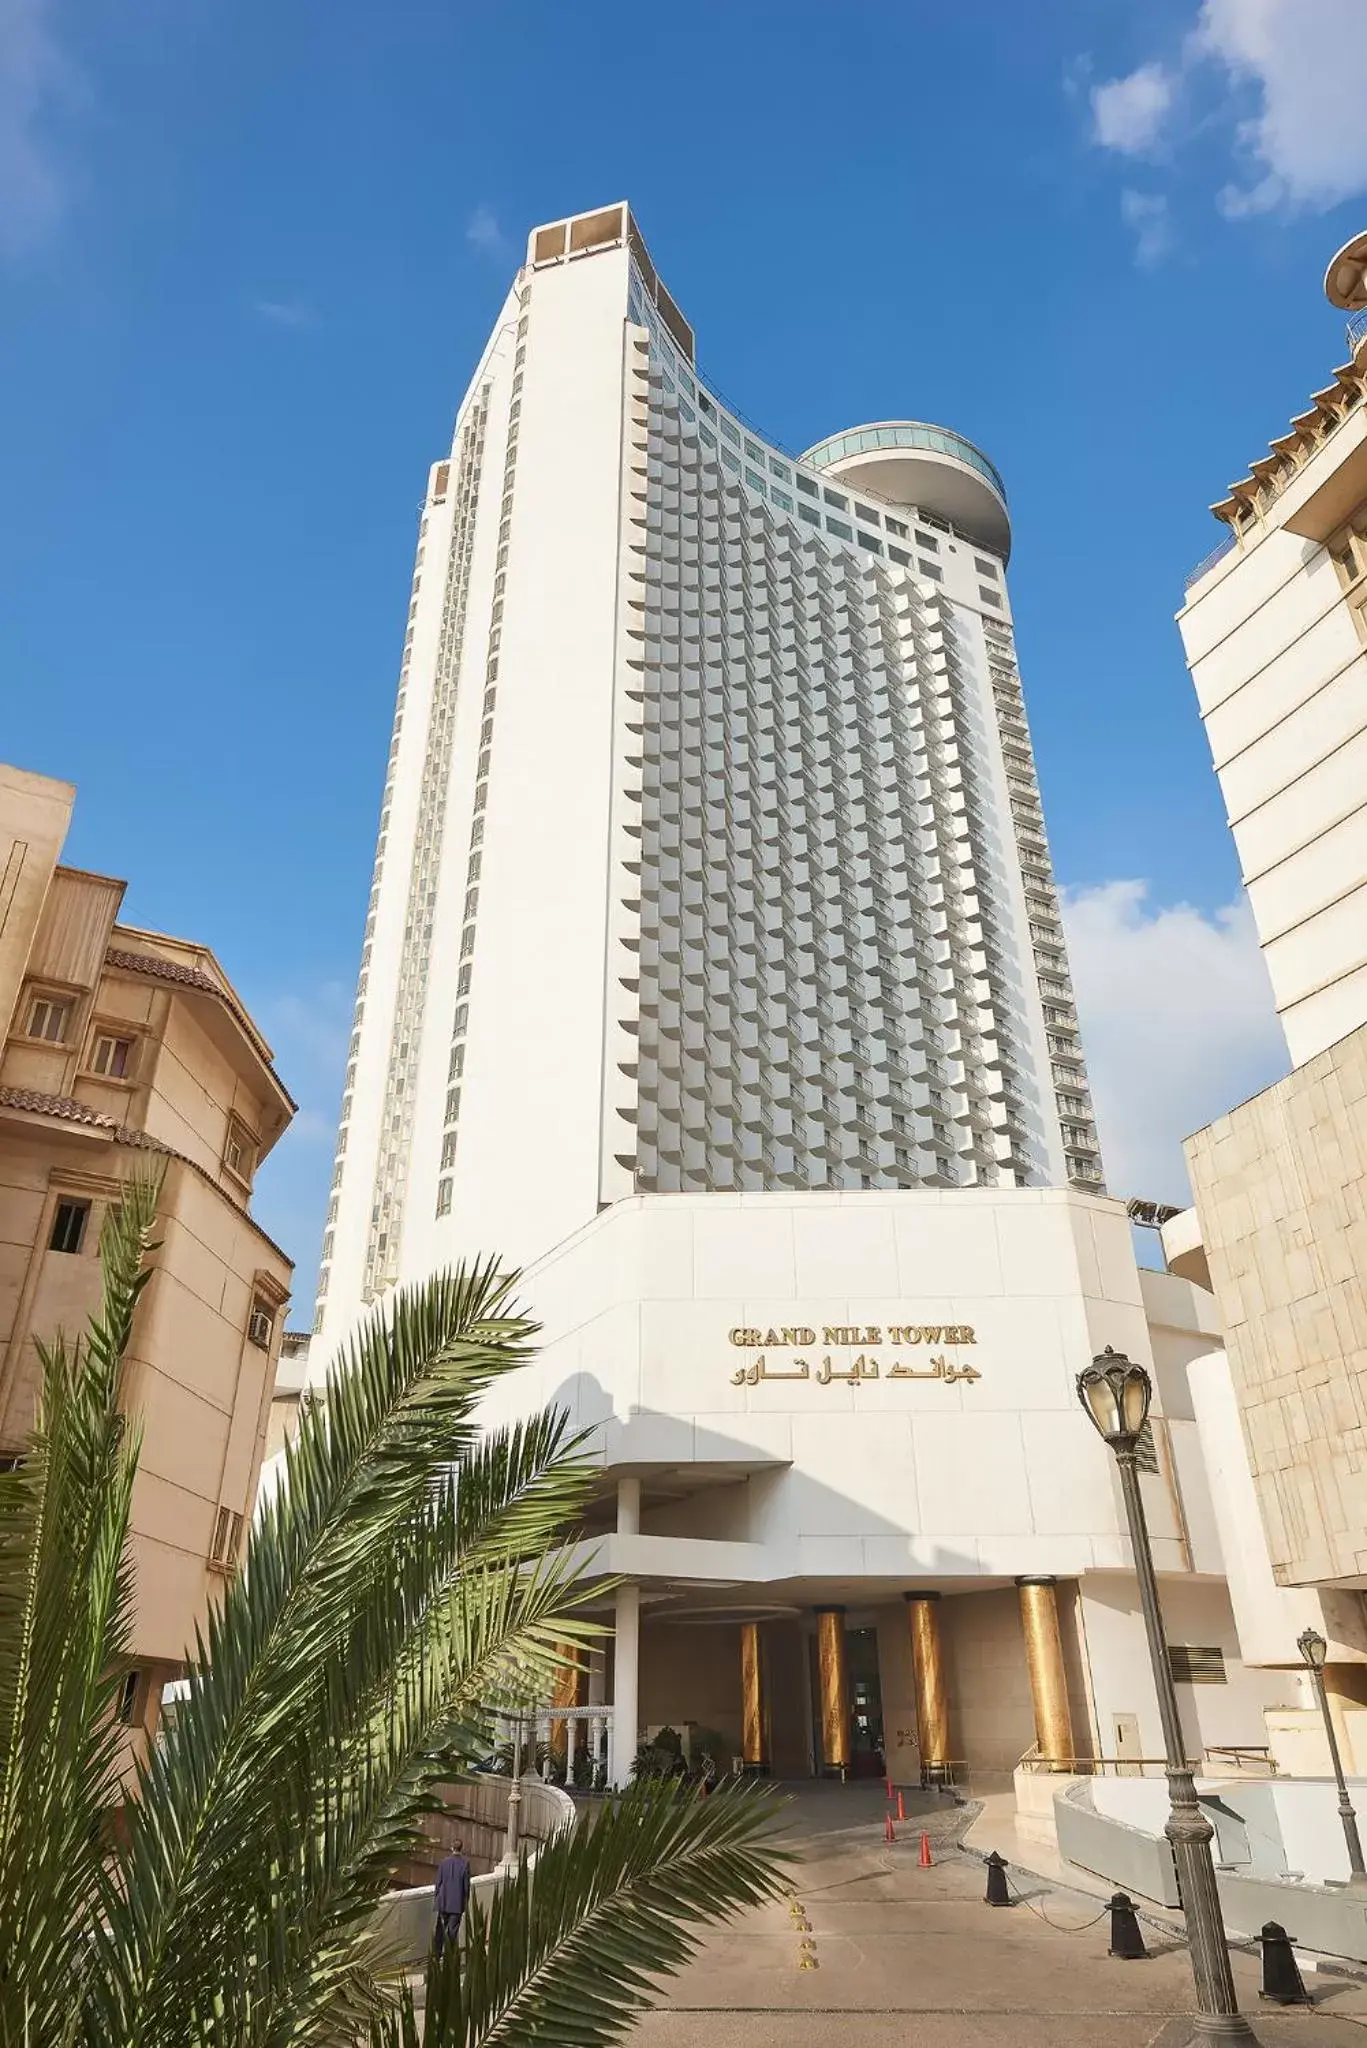 Facade/entrance, Property Building in Grand Nile Tower